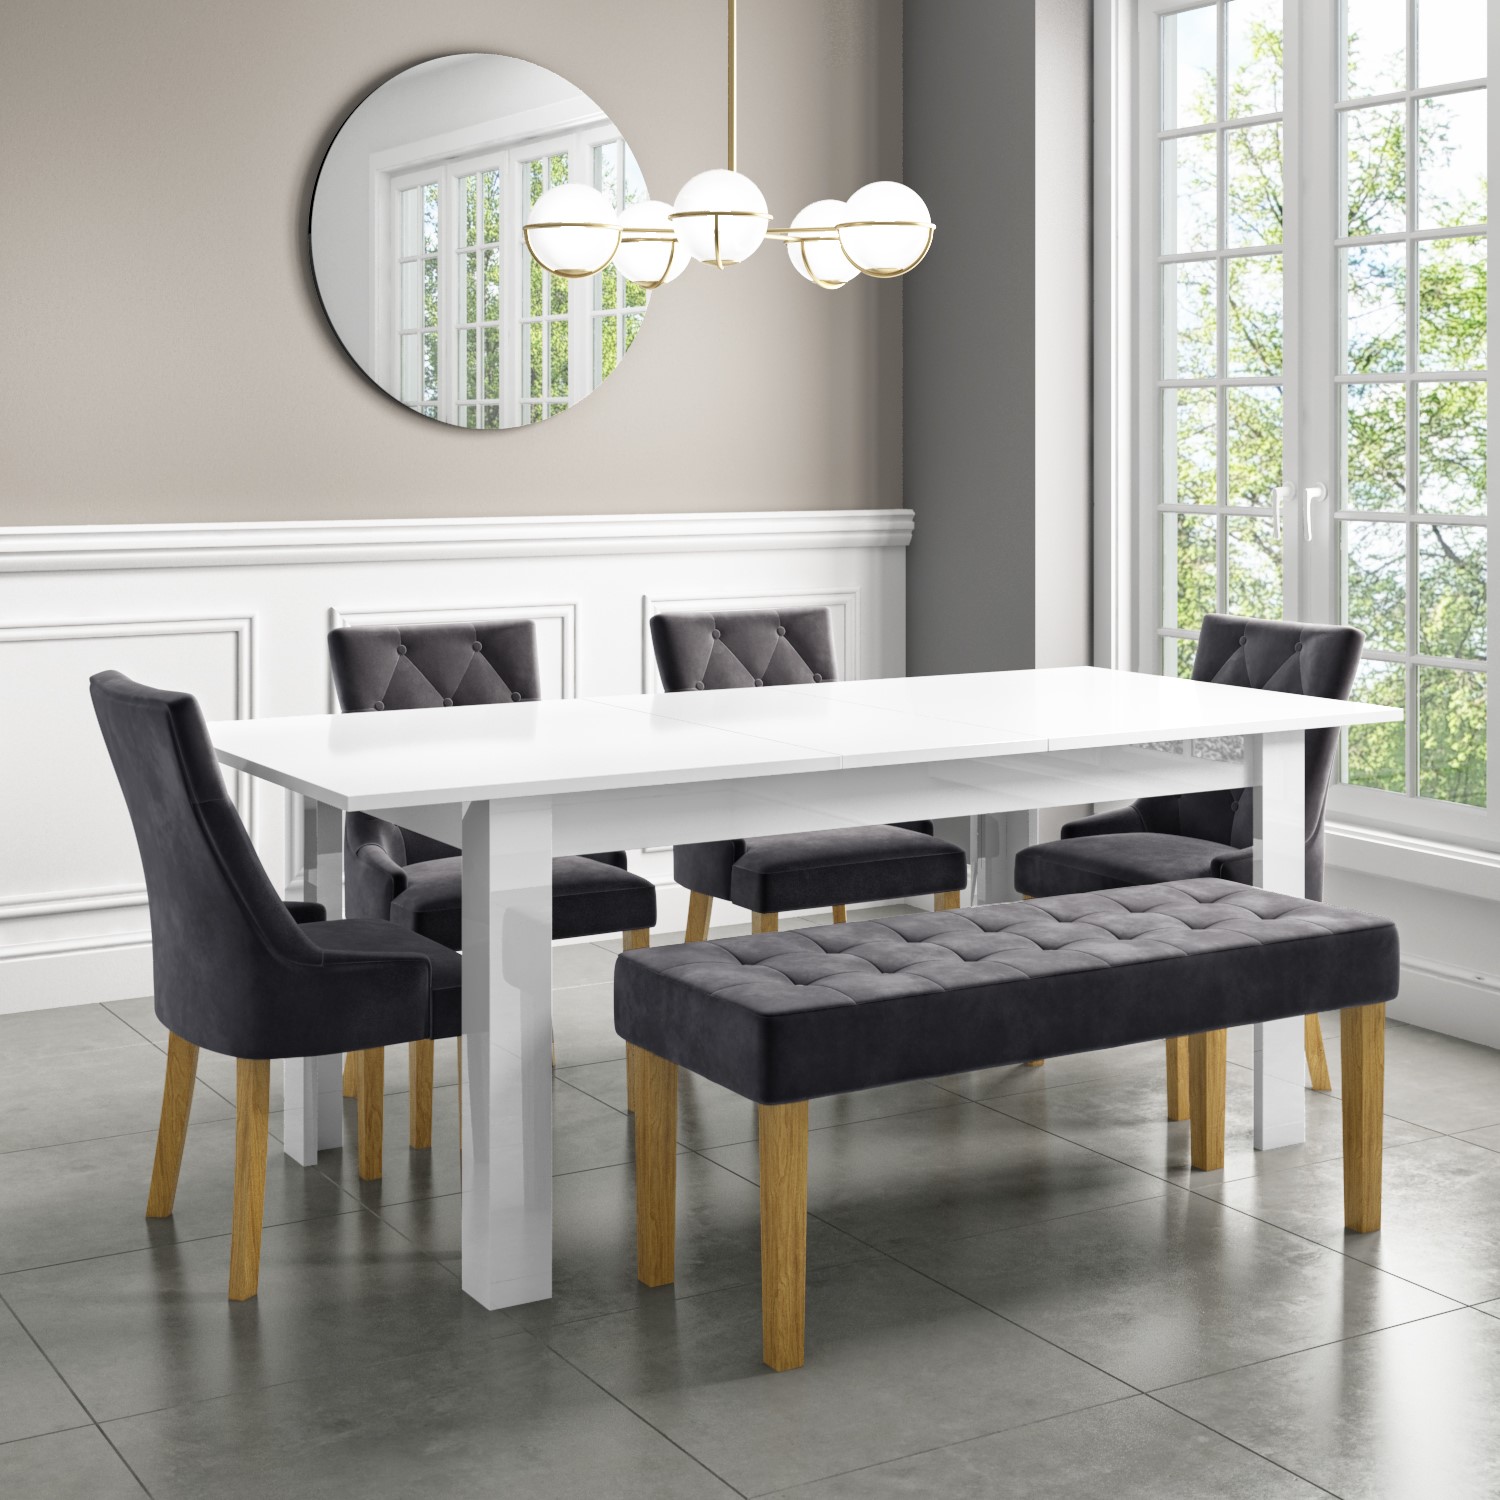 Arise Maestro bush White Gloss Rectangle Dining Table Deals, SAVE 57%.